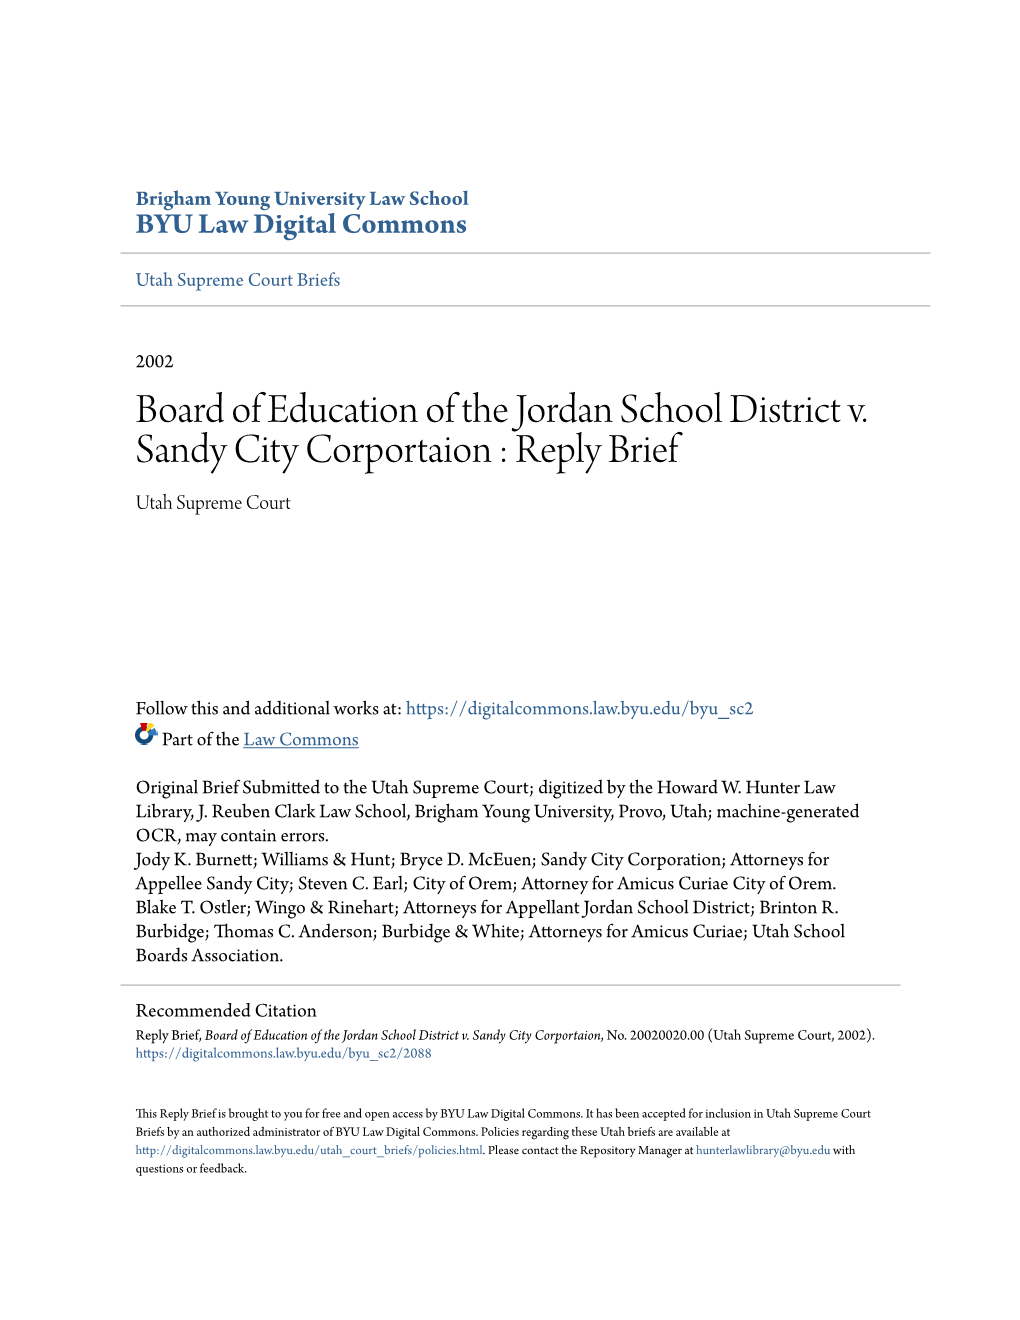 Board of Education of the Jordan School District V. Sandy City Corportaion : Reply Brief Utah Supreme Court